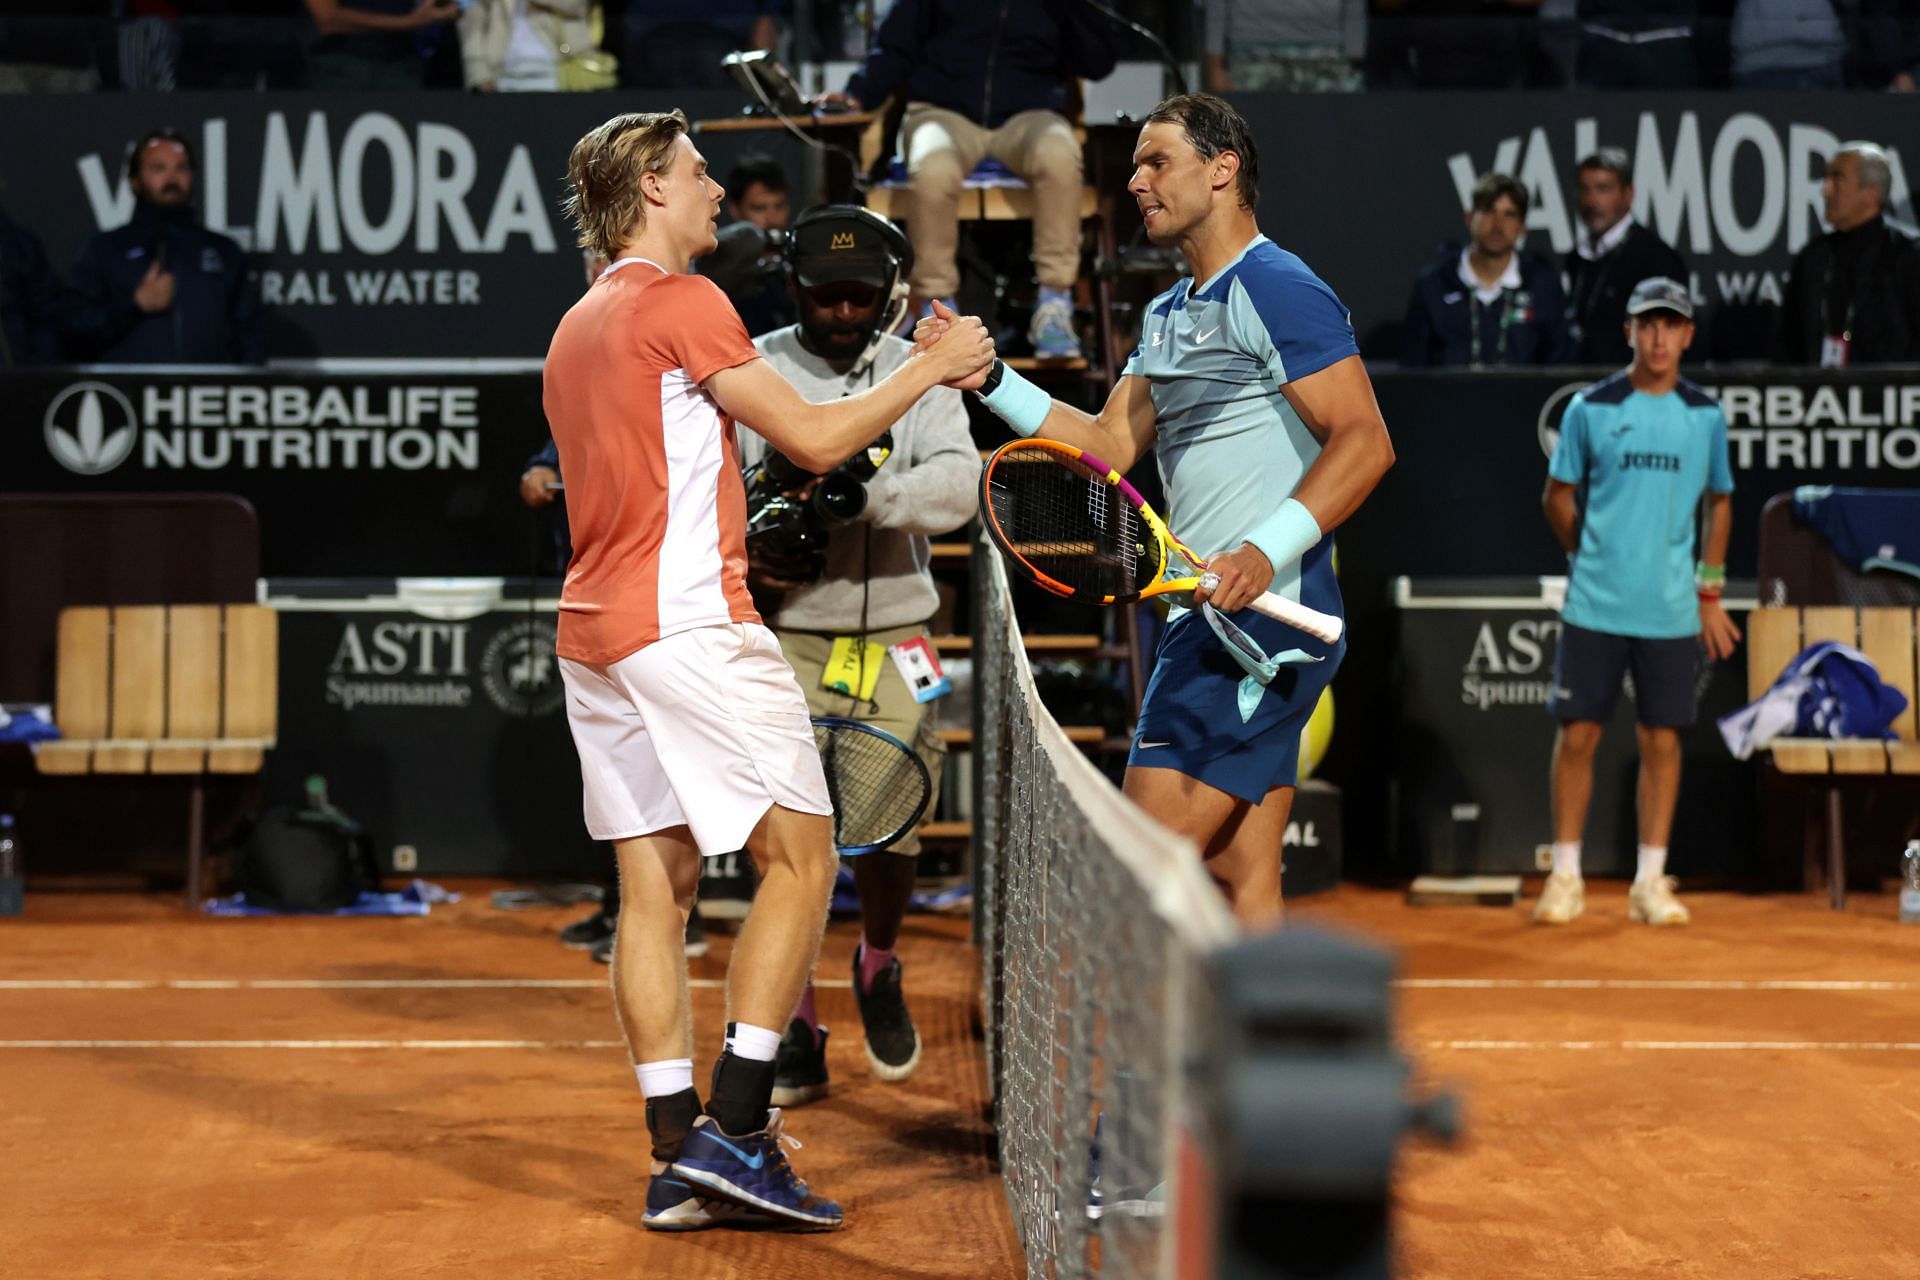 Denis Shapovalov and Rafael Nadal shake hands after their match at the 2022 Italian Open